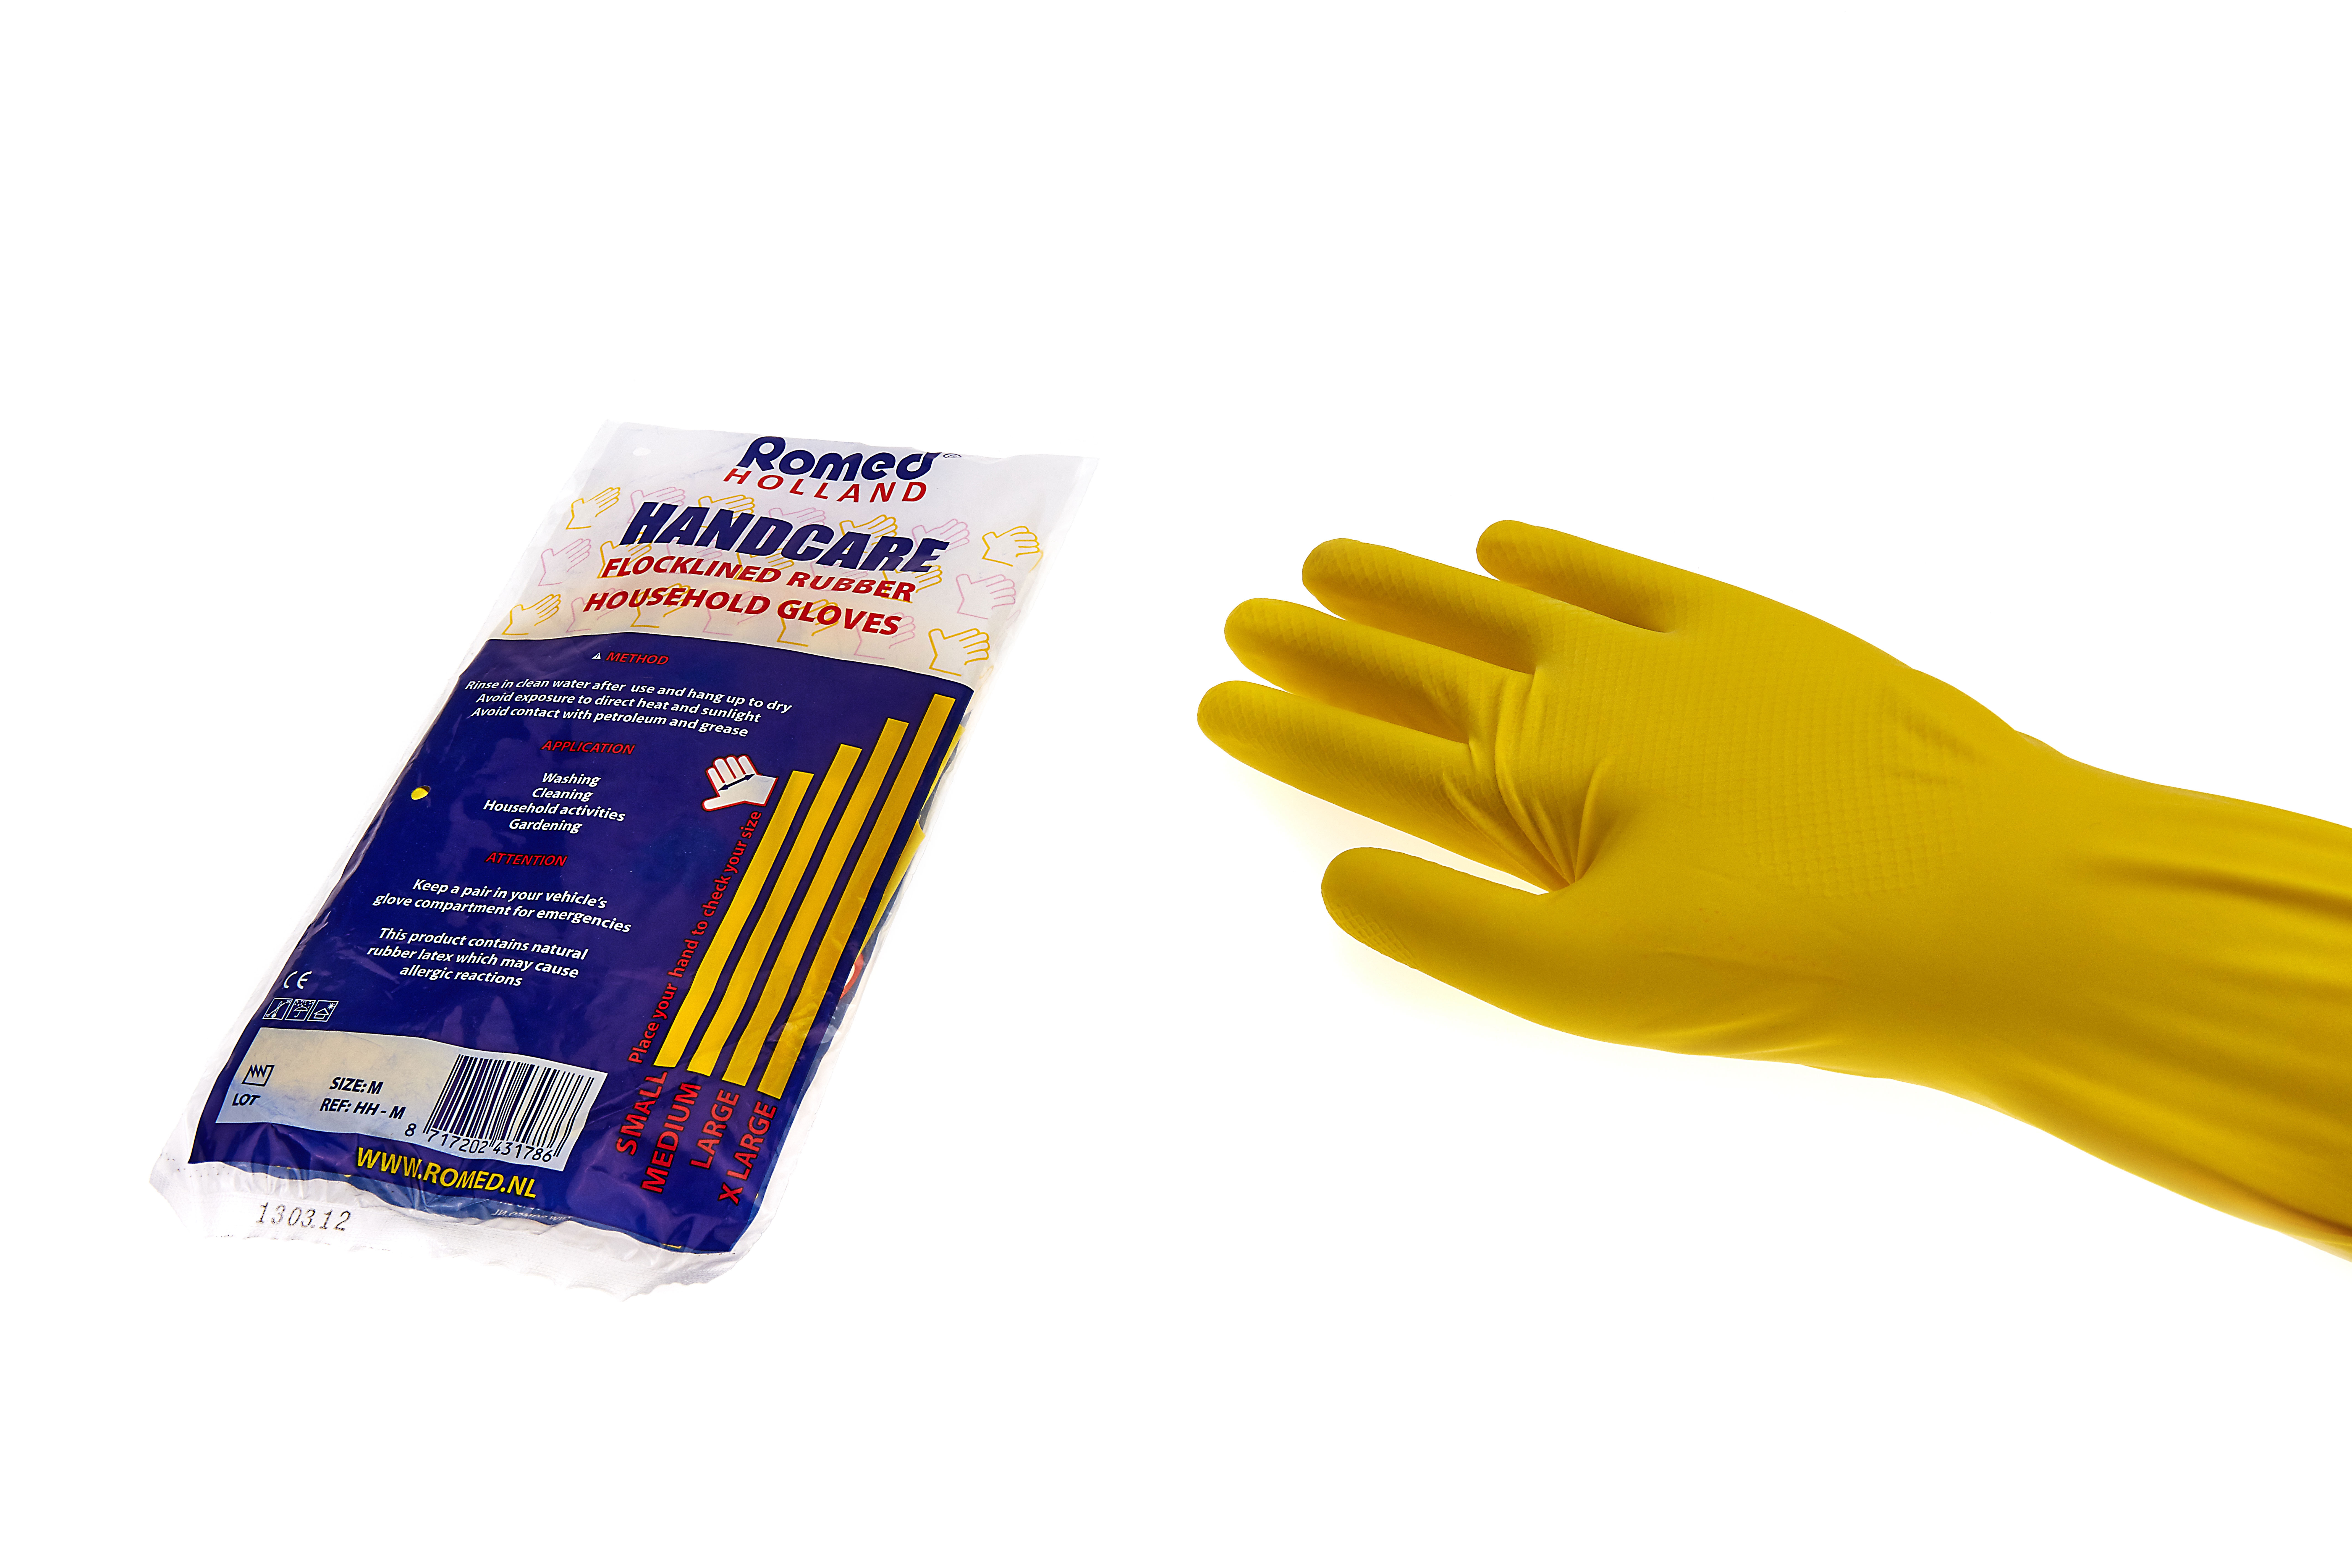 HH-L Romed household gloves, large, per pair in a polybag, 12 polybags in a master polybag, 12 x 12 pairs = 144 pairs in a carton.